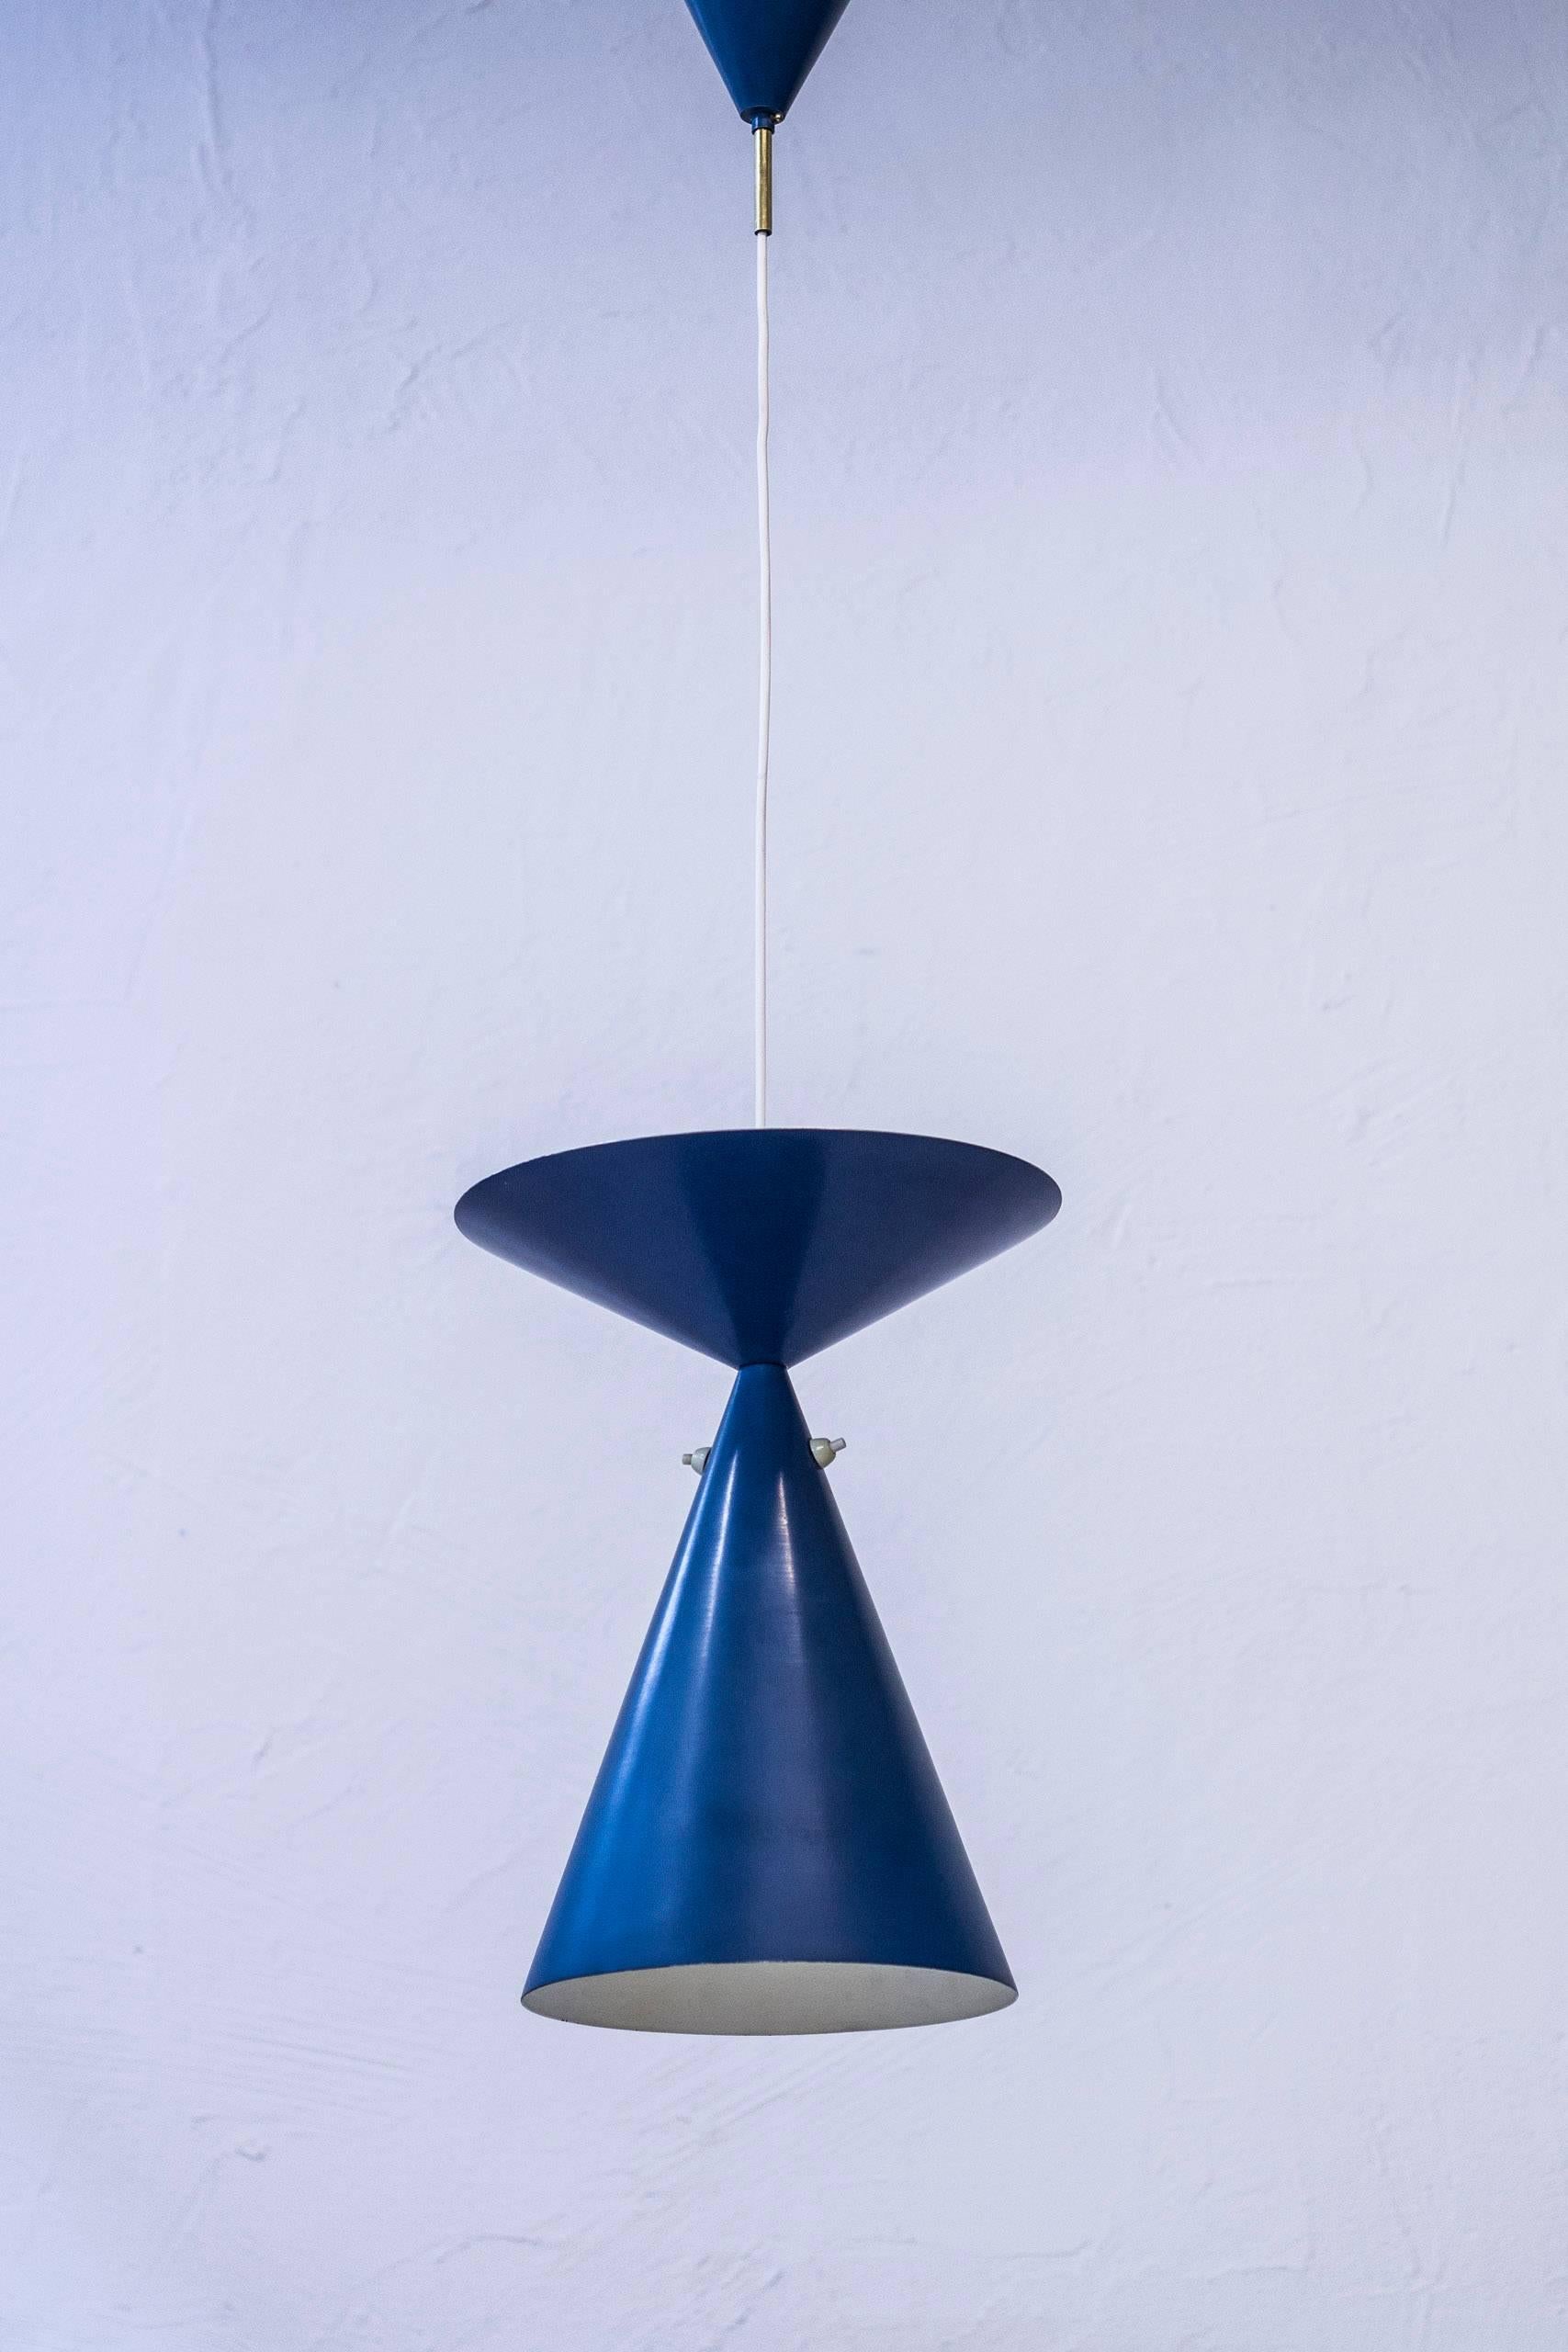 Rare ceiling lamp designed by Bertil Brisborg. Designed and Produced, circa 1950 in very limited quantities. Produced by Nordiska Kompaniet. Blue lacquered up and down light with light switches on the down light shade for varying the light according